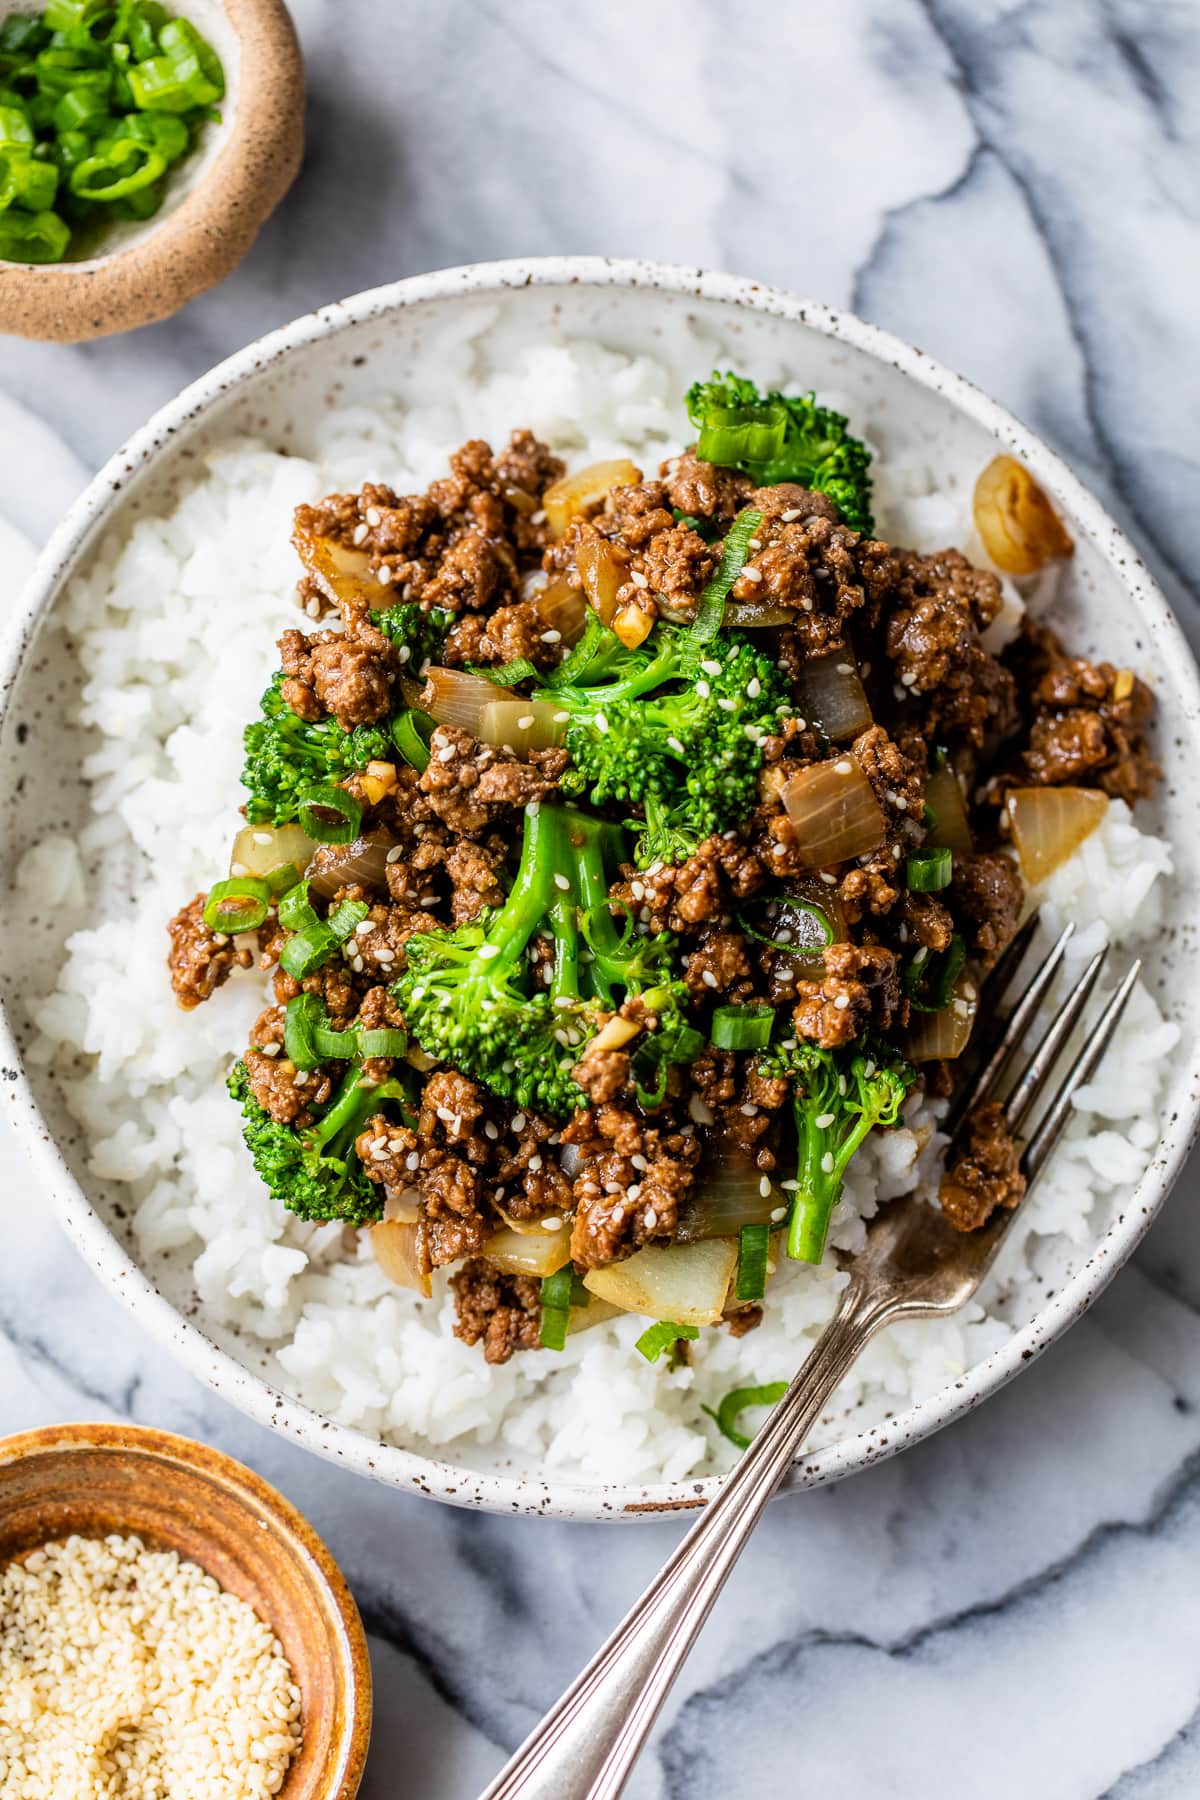 Plate with ground beef and broccoli rice and fork